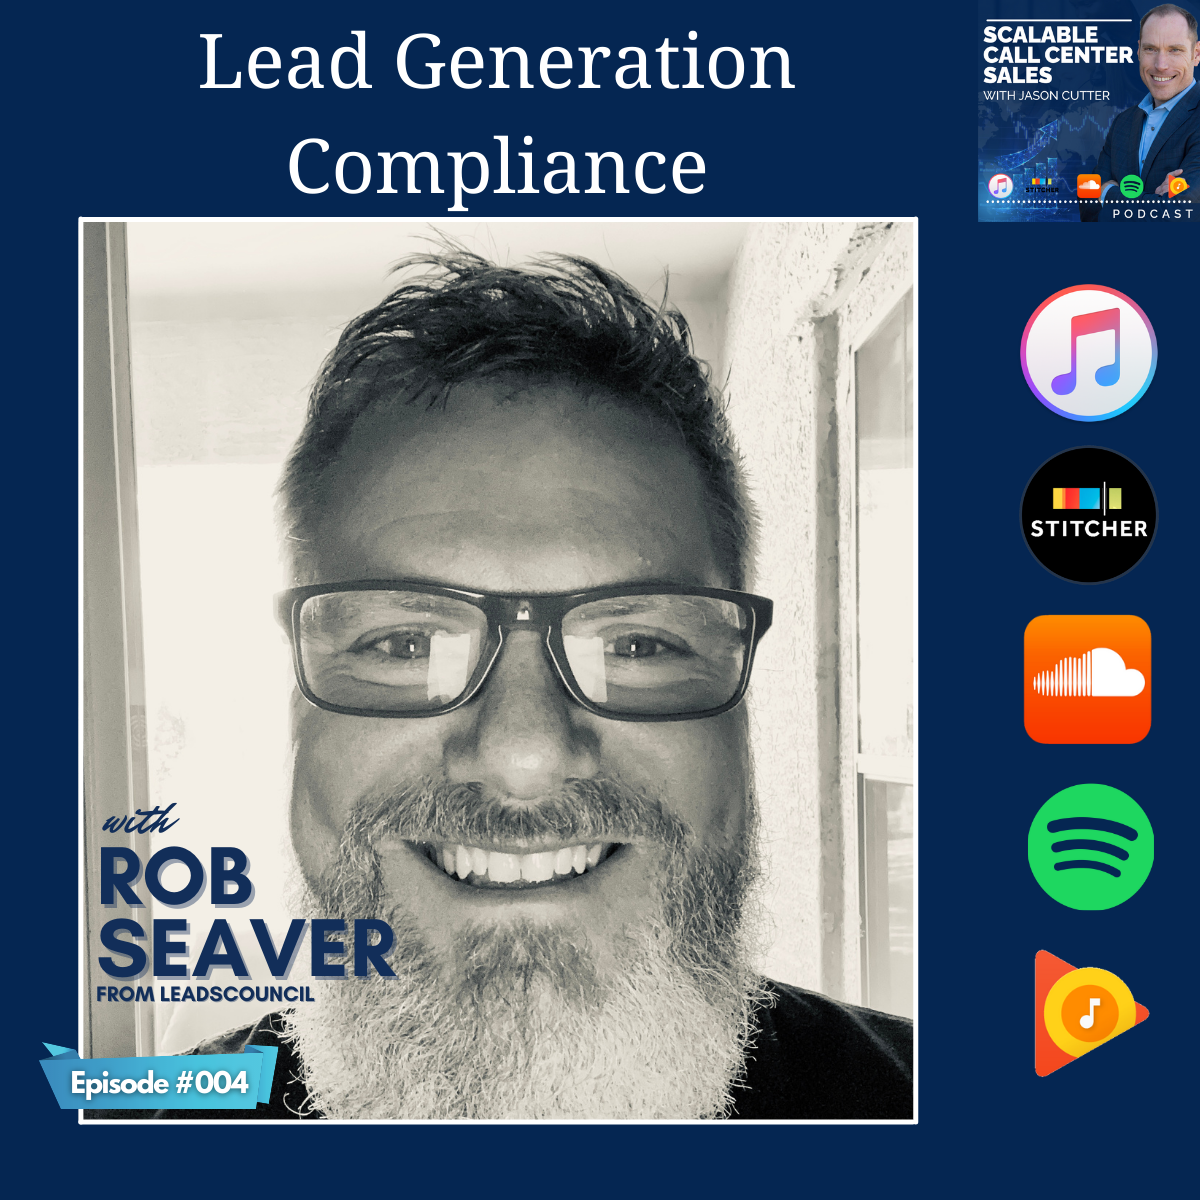 [004] Lead Generation Compliance, with Rob Seaver from LeadsCouncil